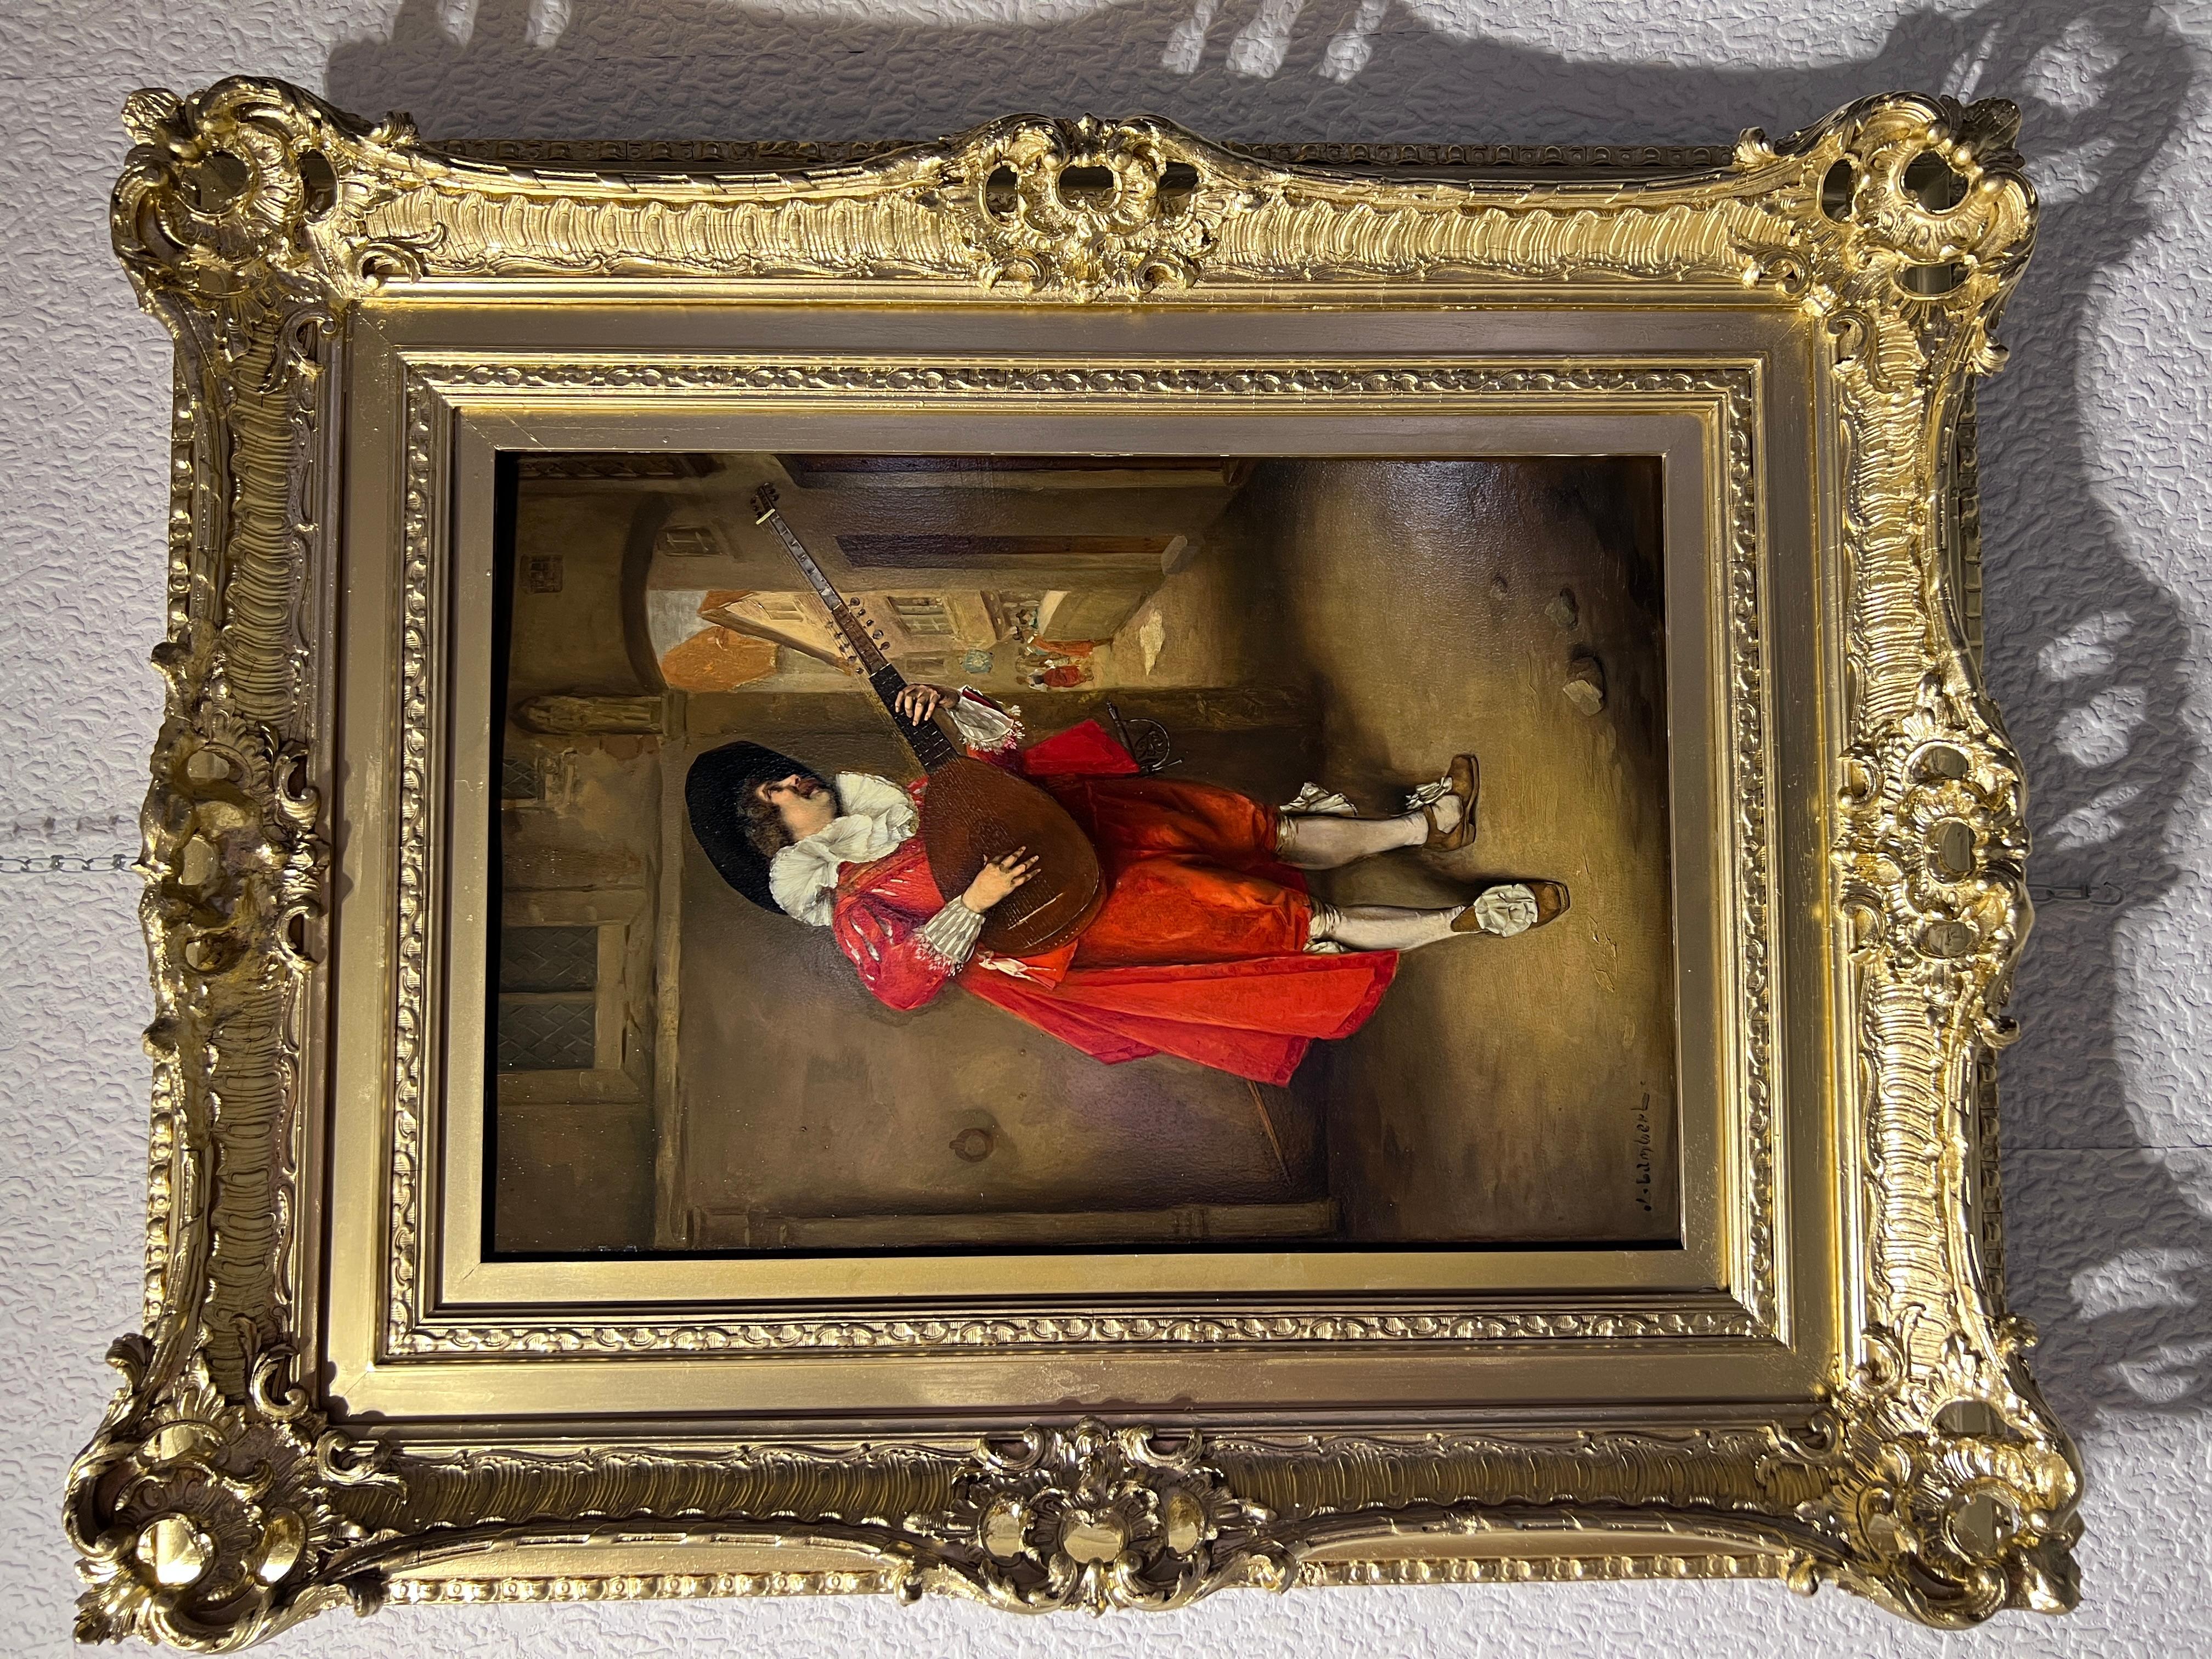 Up for sale is an amazing original antique oil painting on a wooden board depicting a portrait of a nobleman in a red camisole with a guitar. He peers around the corner as if he is anticipating someone's arrival.

The painting is in good/antique